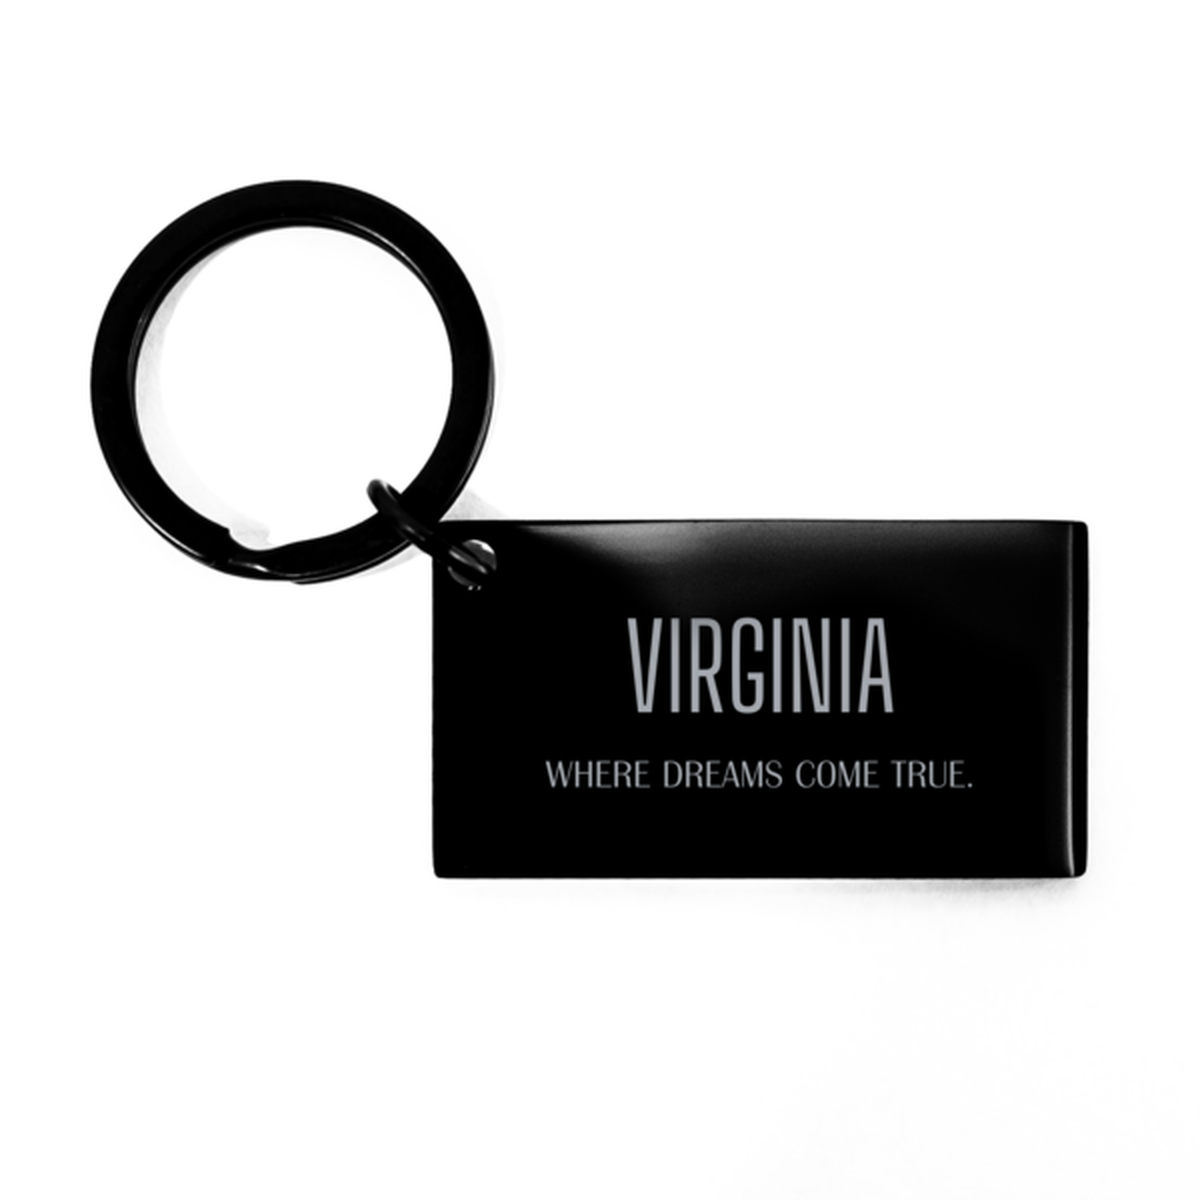 Love Virginia State Keychain, Virginia Where dreams come true, Birthday Inspirational Gifts For Virginia Men, Women, Friends